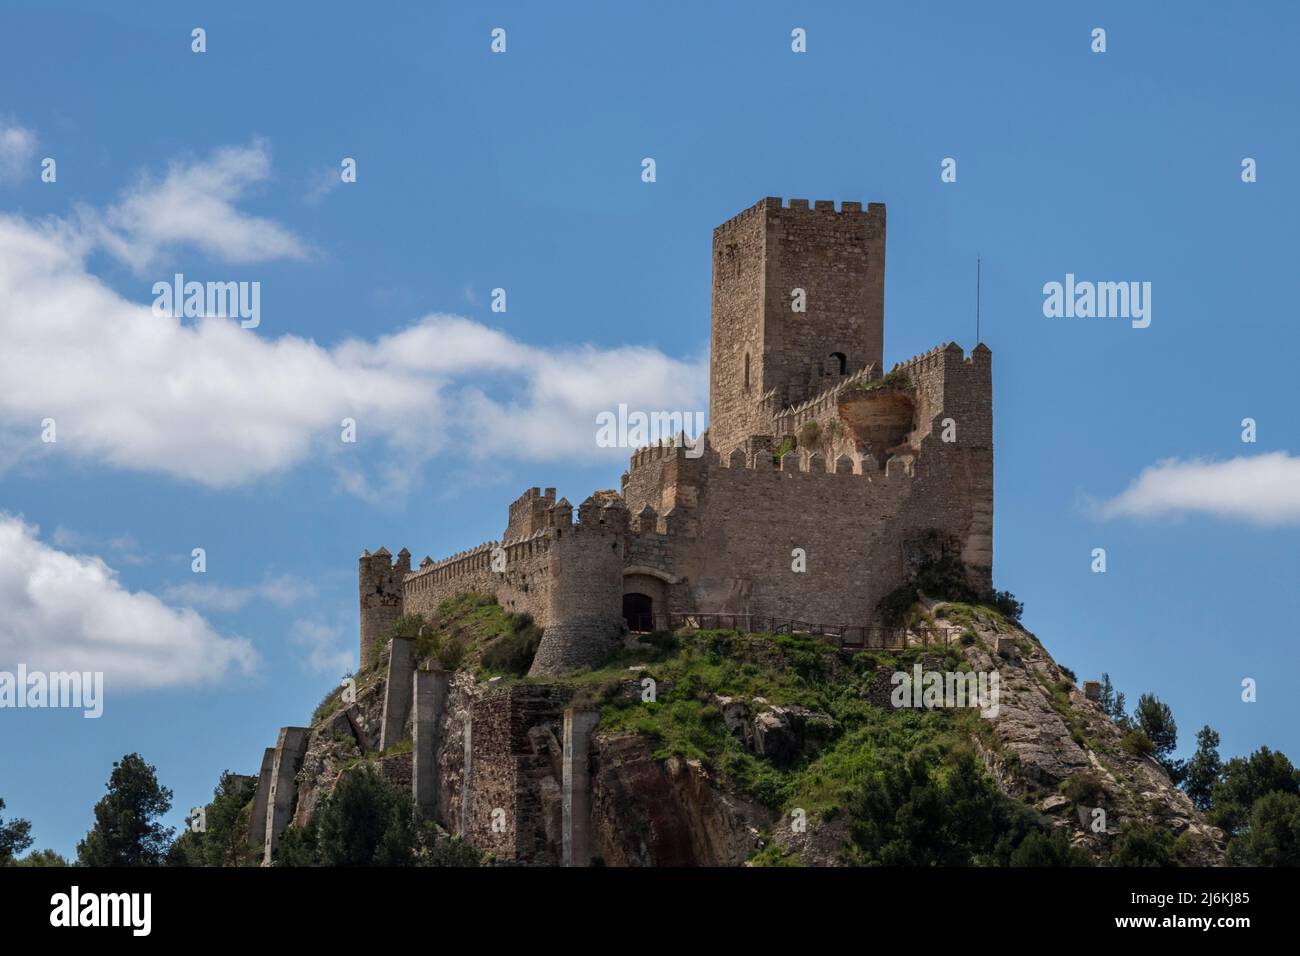 HDR image of the castle of Almansa in Spain Stock Photo